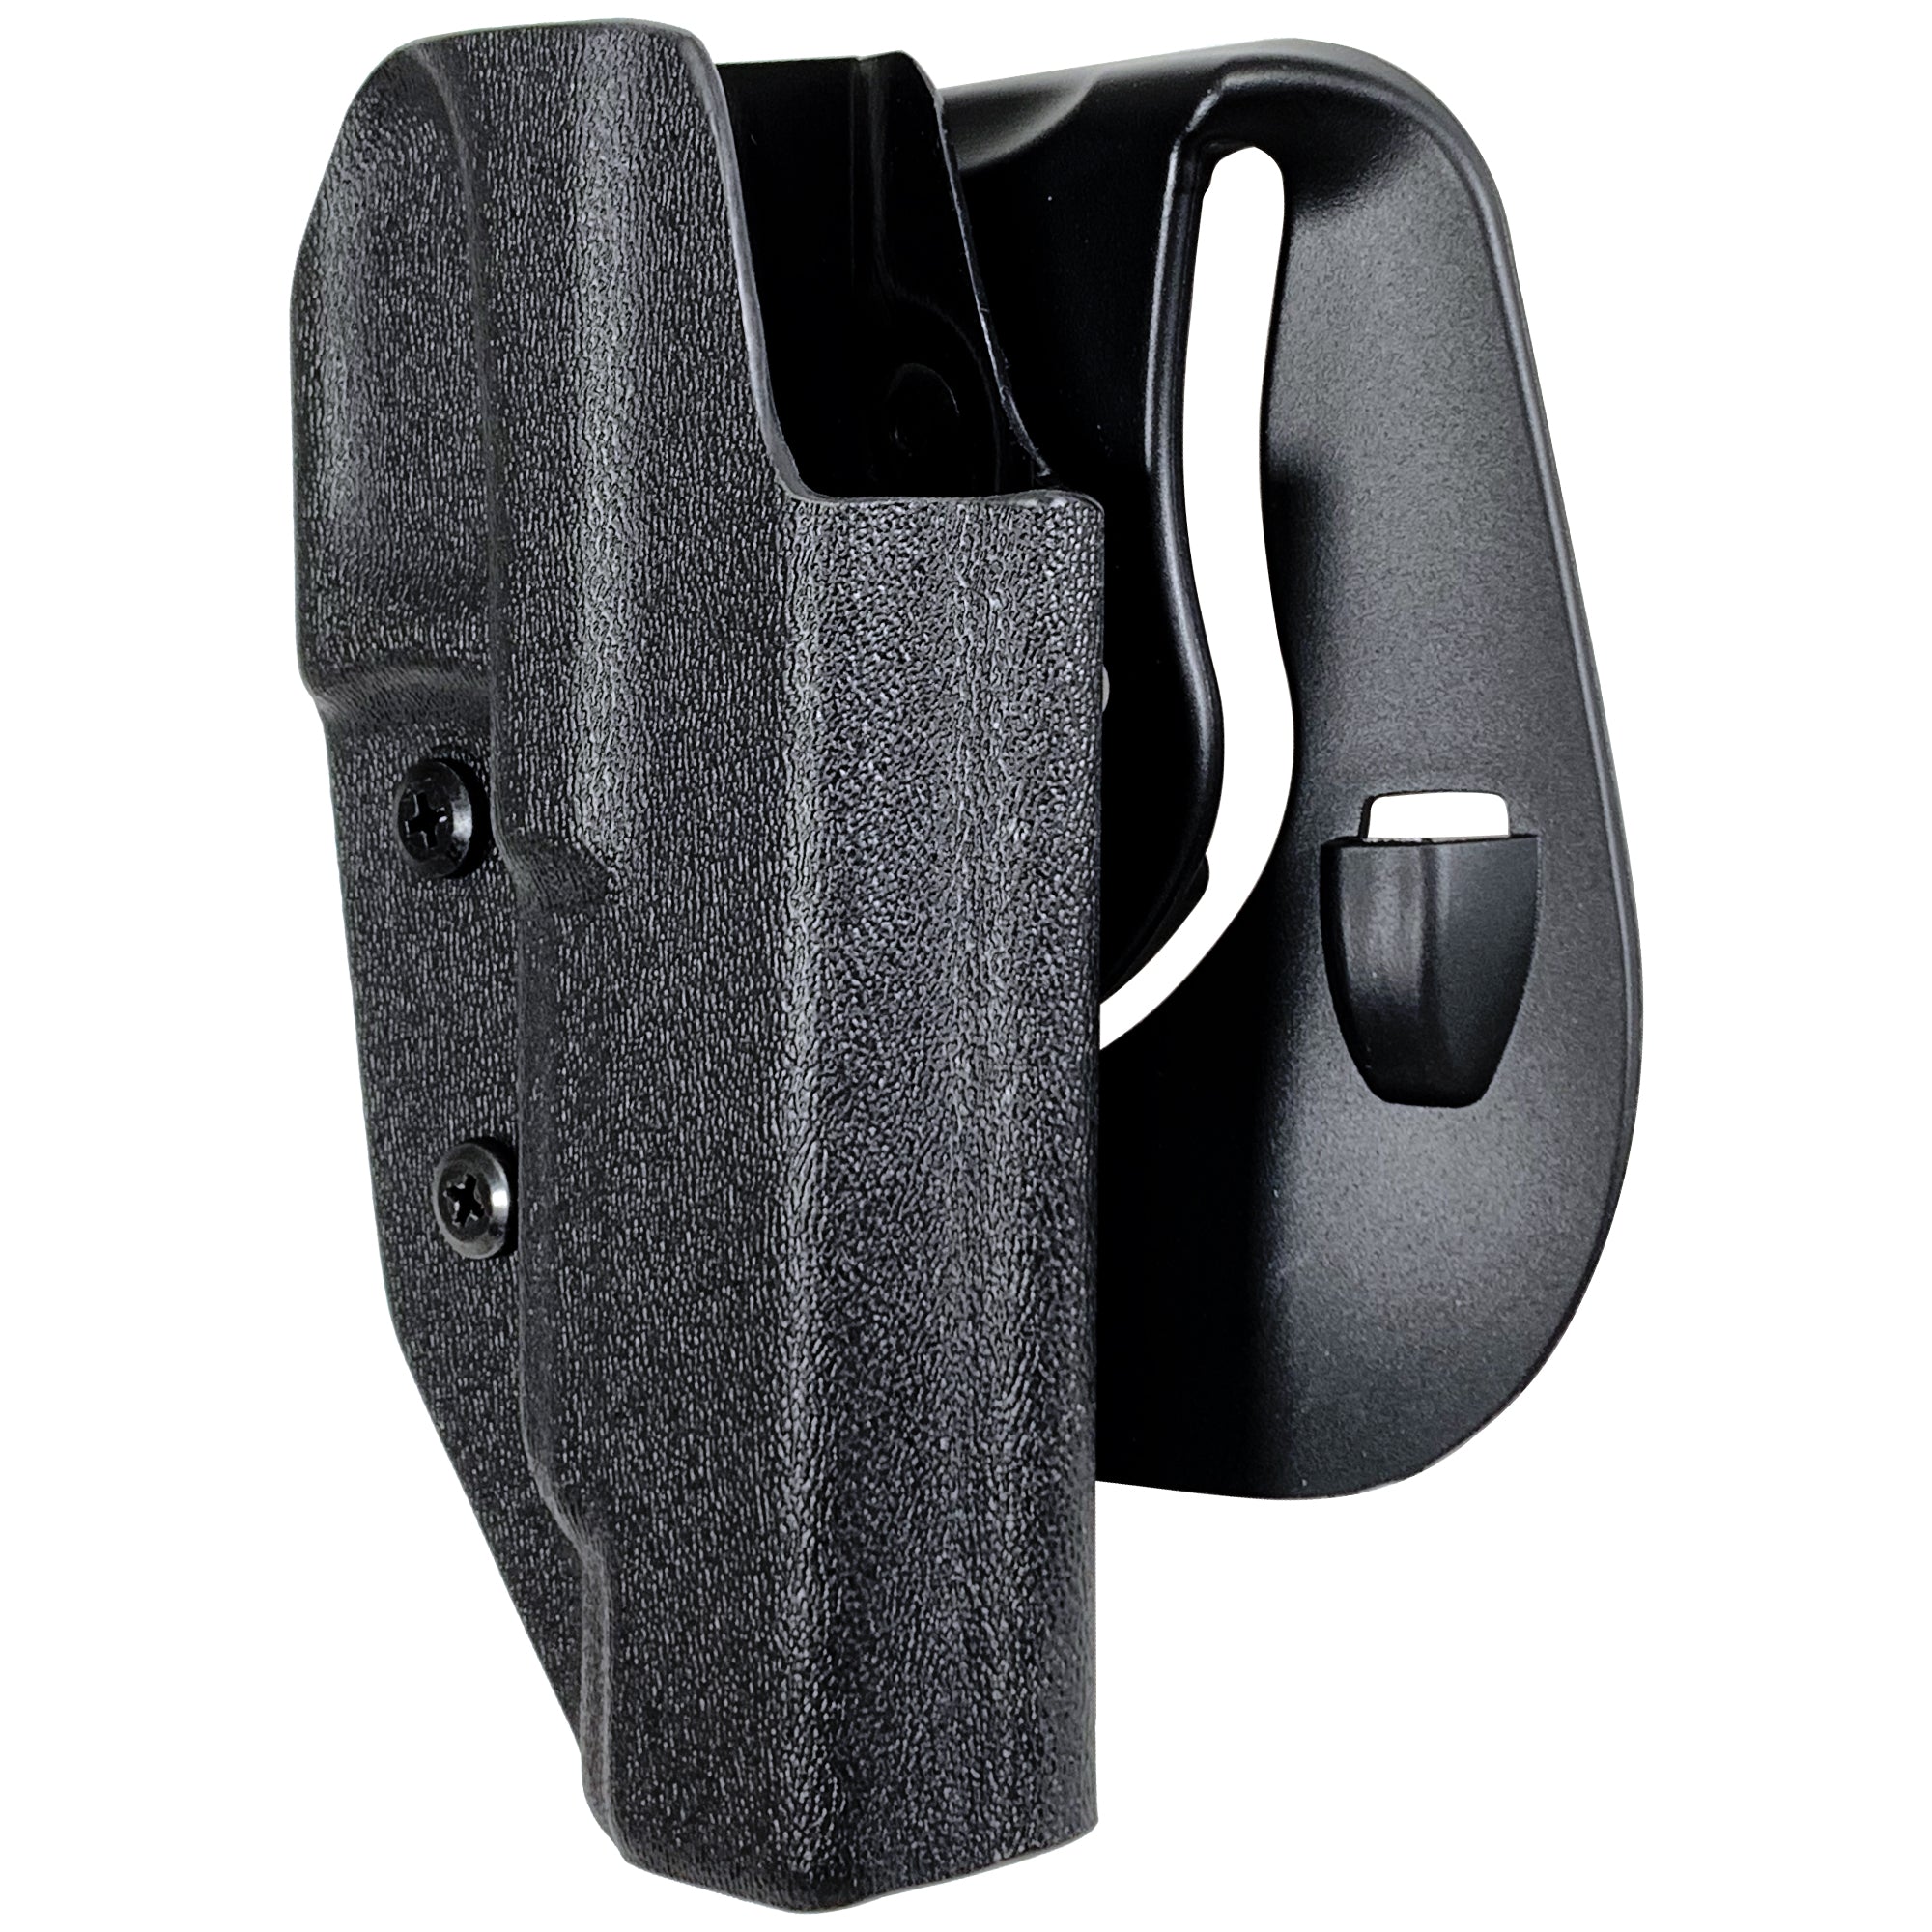 2011 5'' w/ Full Dust Cover OWB Paddle Holster